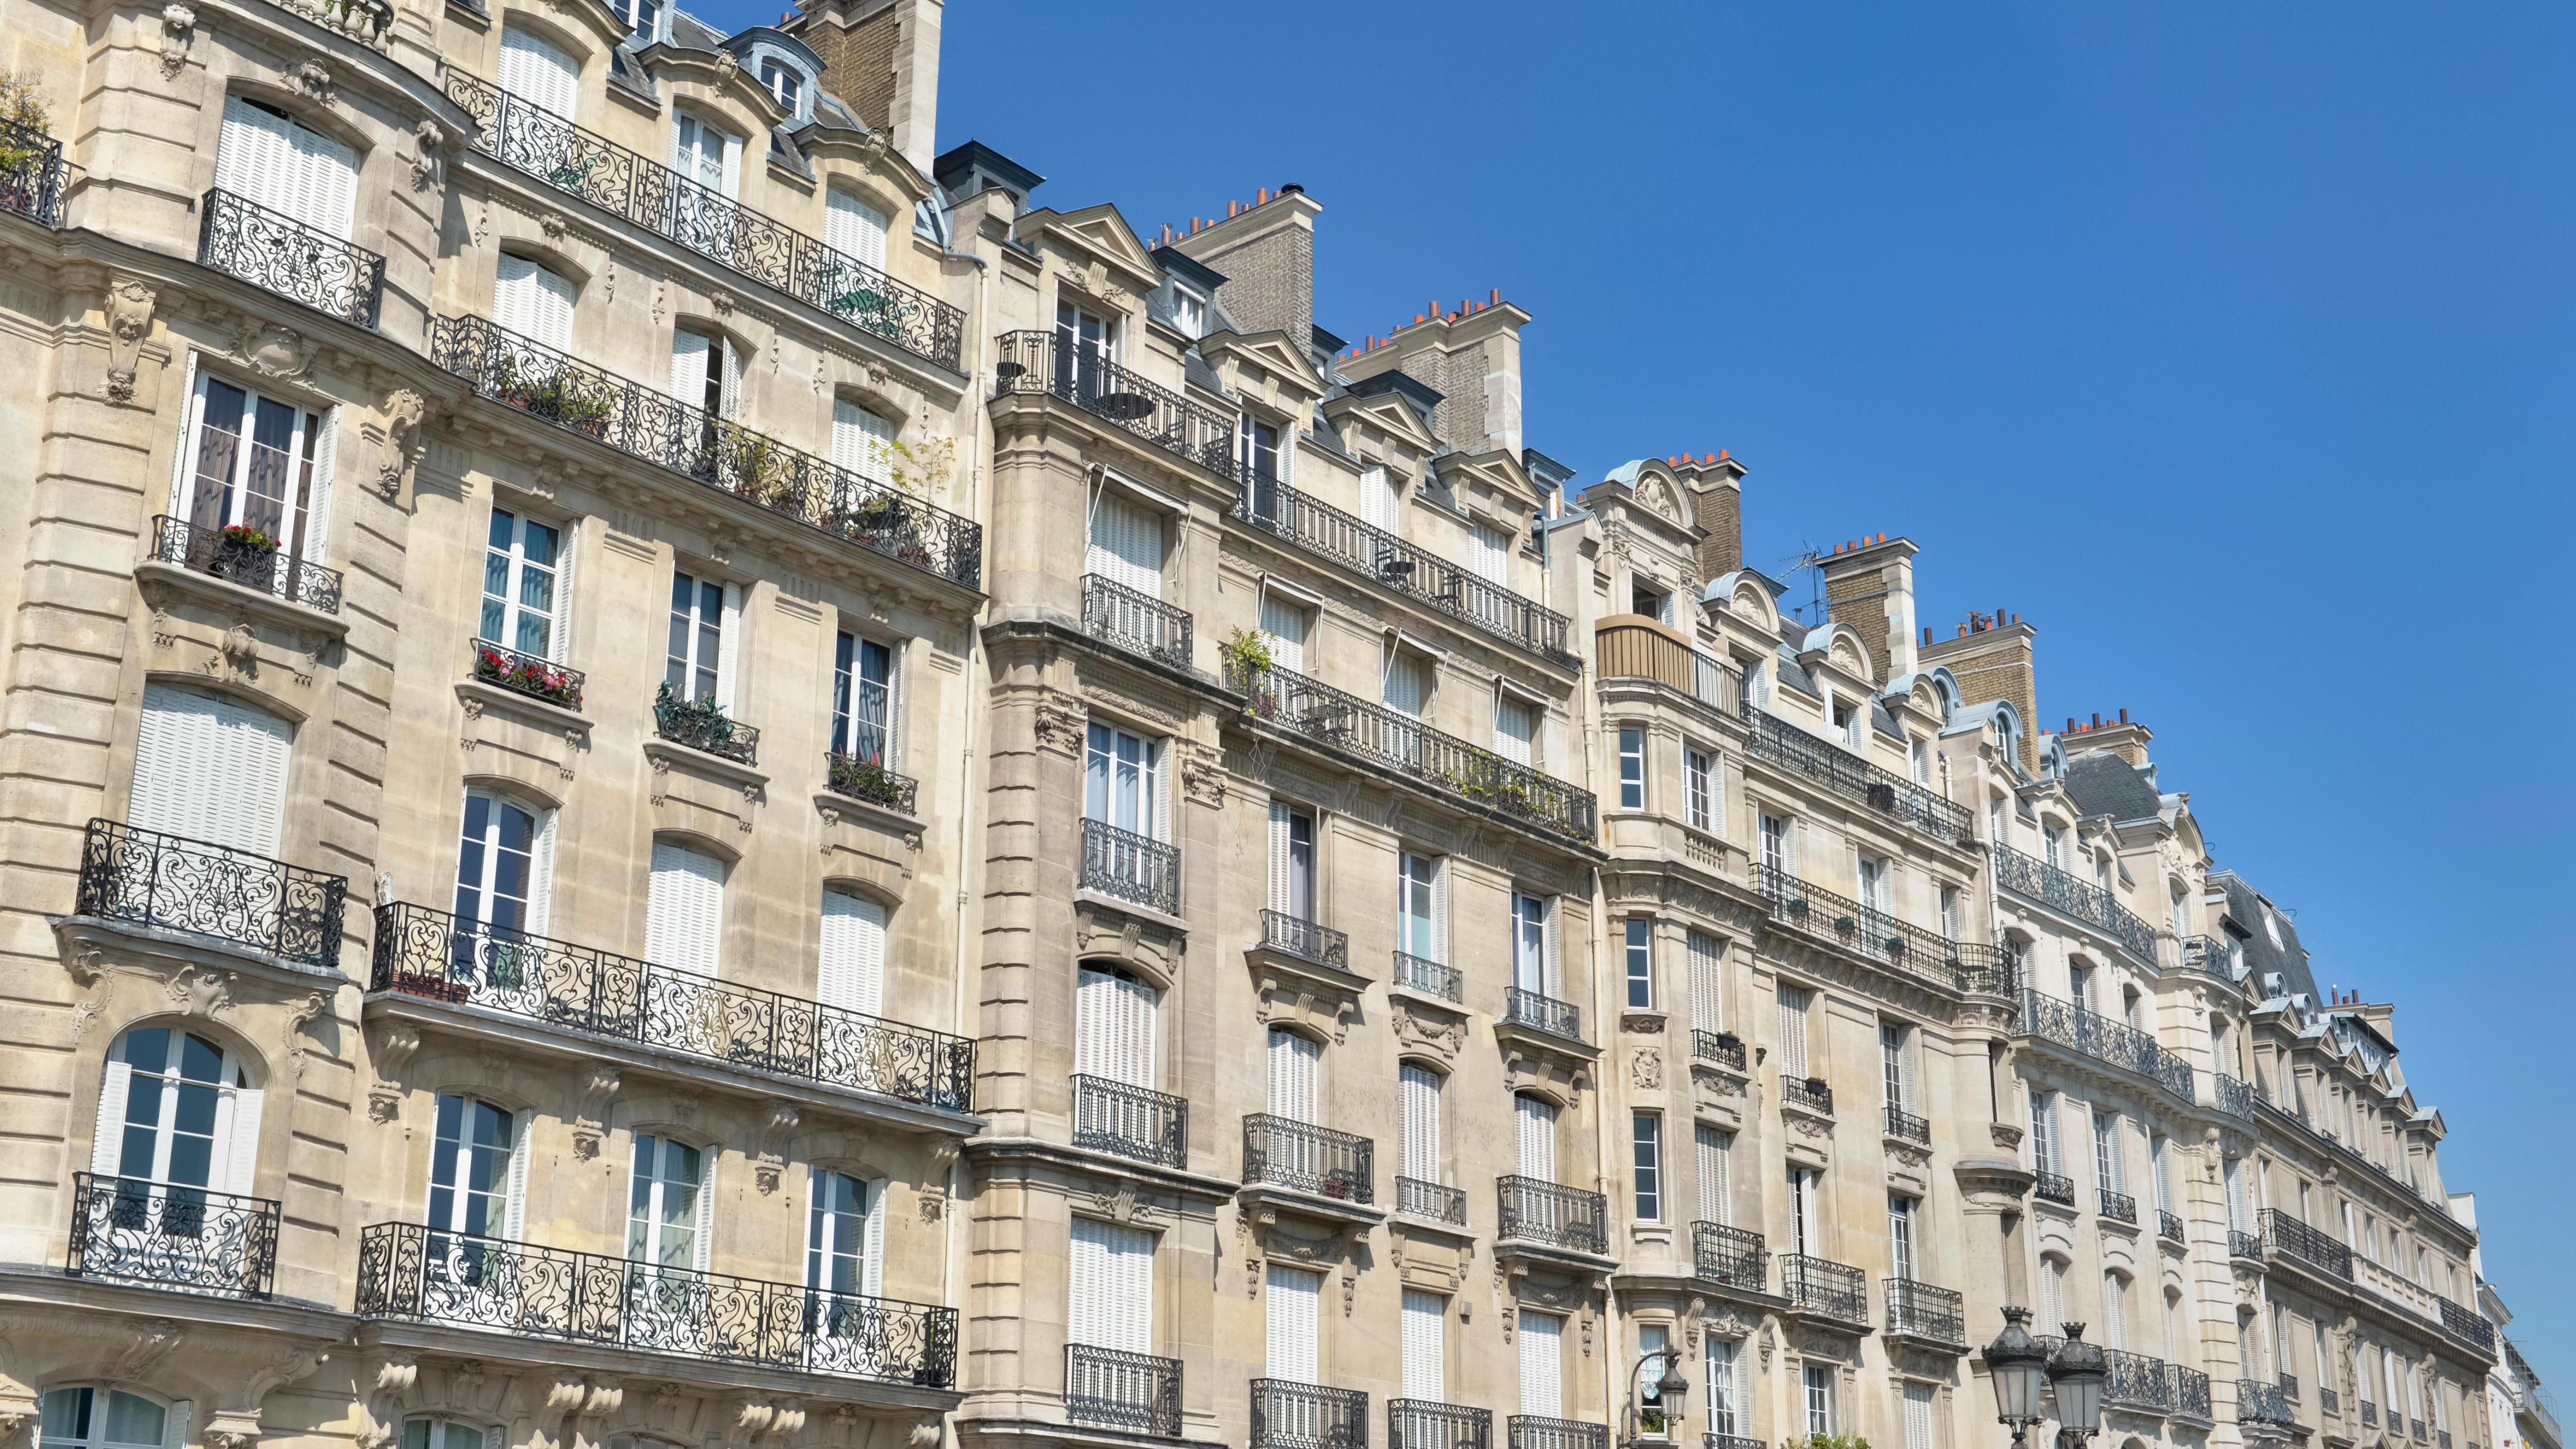 The city’s balconies, part of its Haussmann-style architecture, could collapse if too many people stand on them, experts said